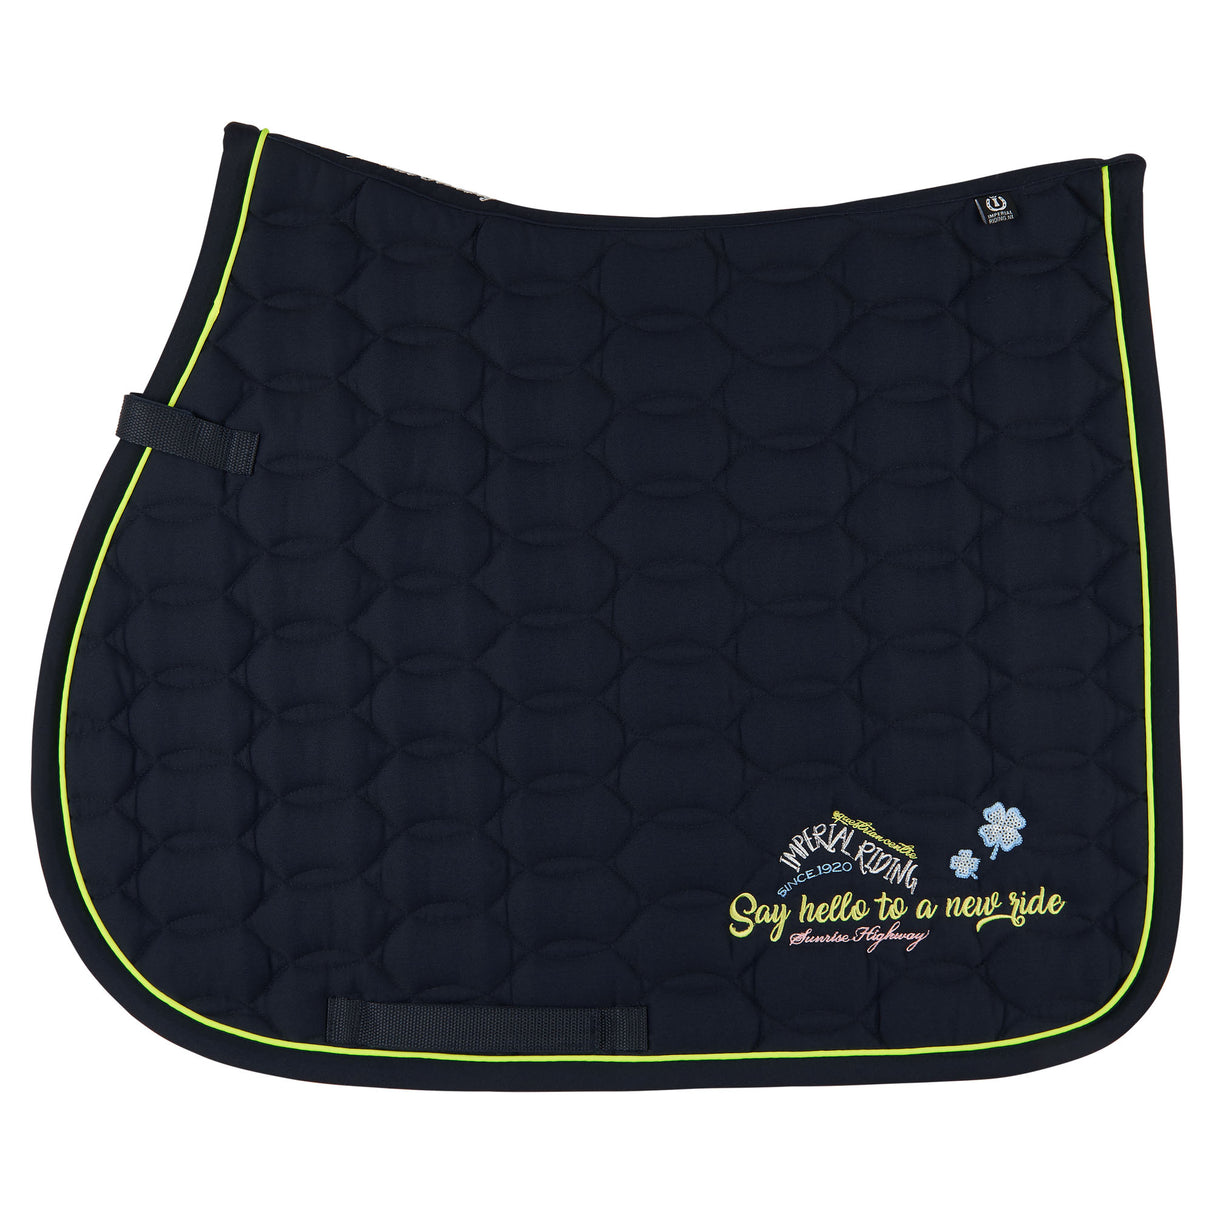 Imperial Riding Nyd GP Saddle Pad